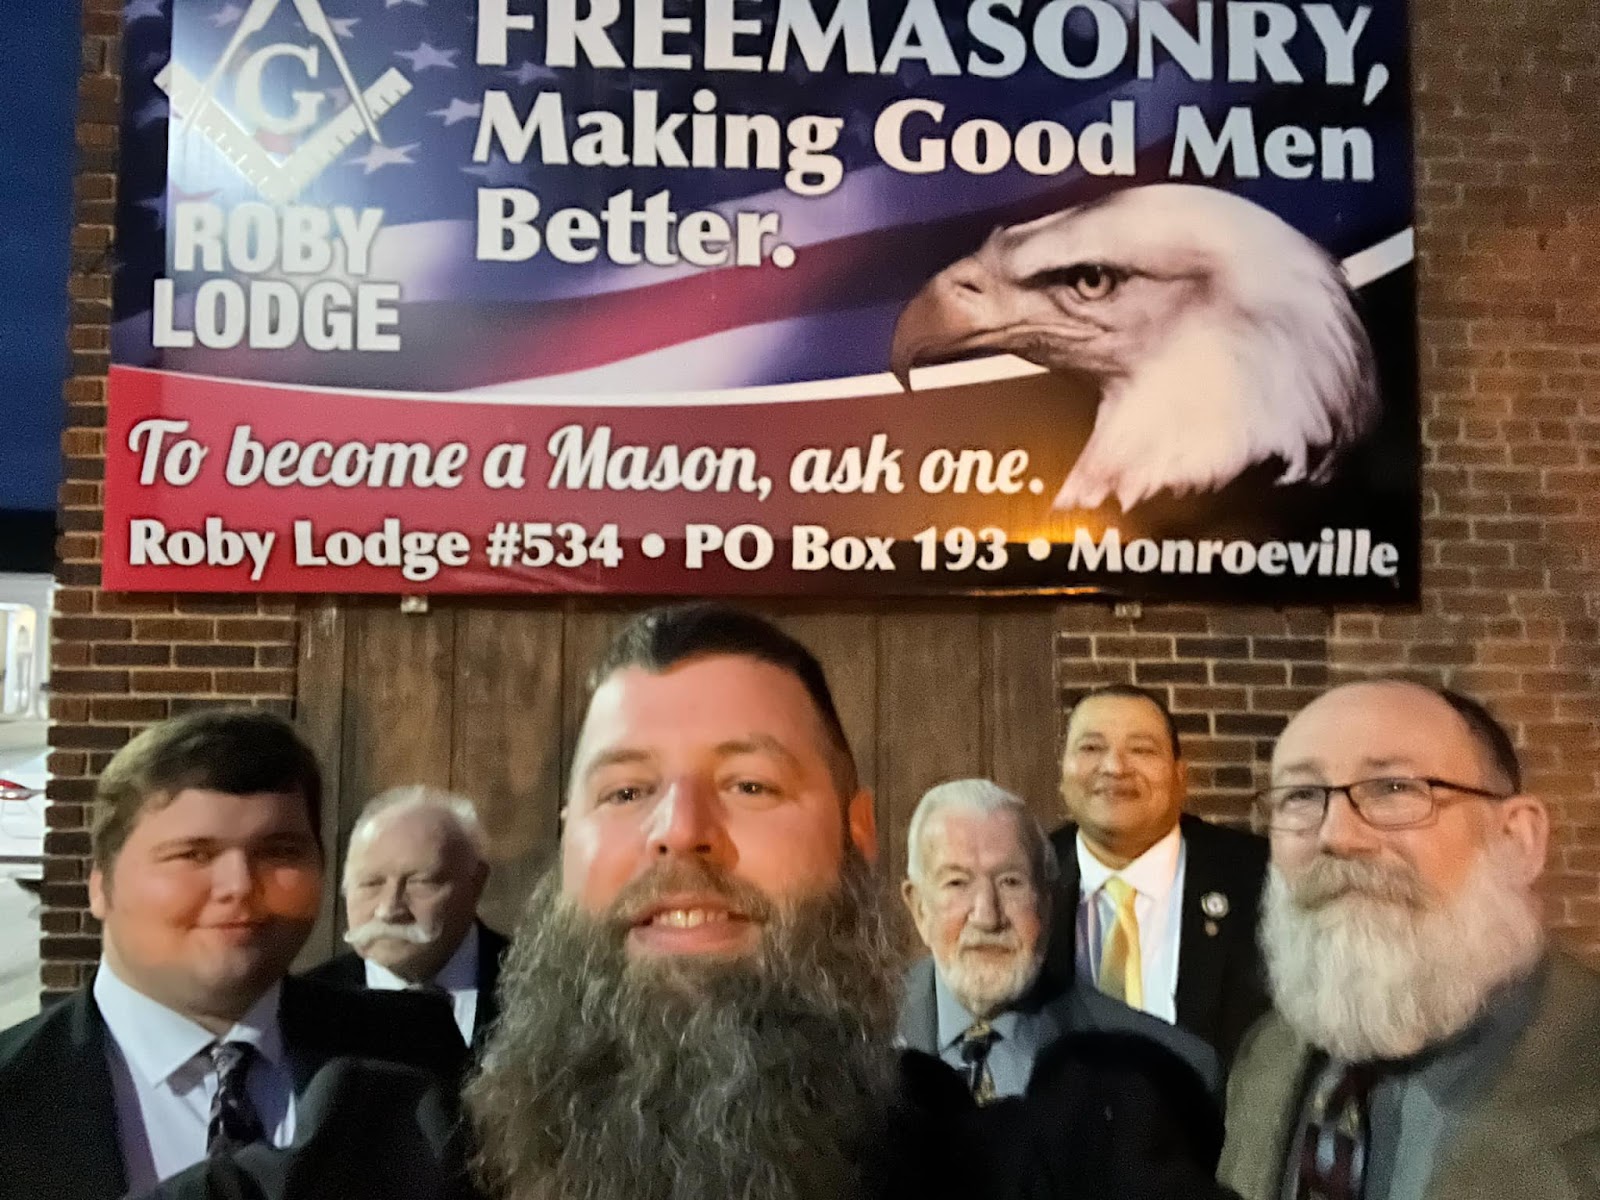 Image of Bellevue Lodge brothers visiting Roby Lodge #534 in Monroeville.